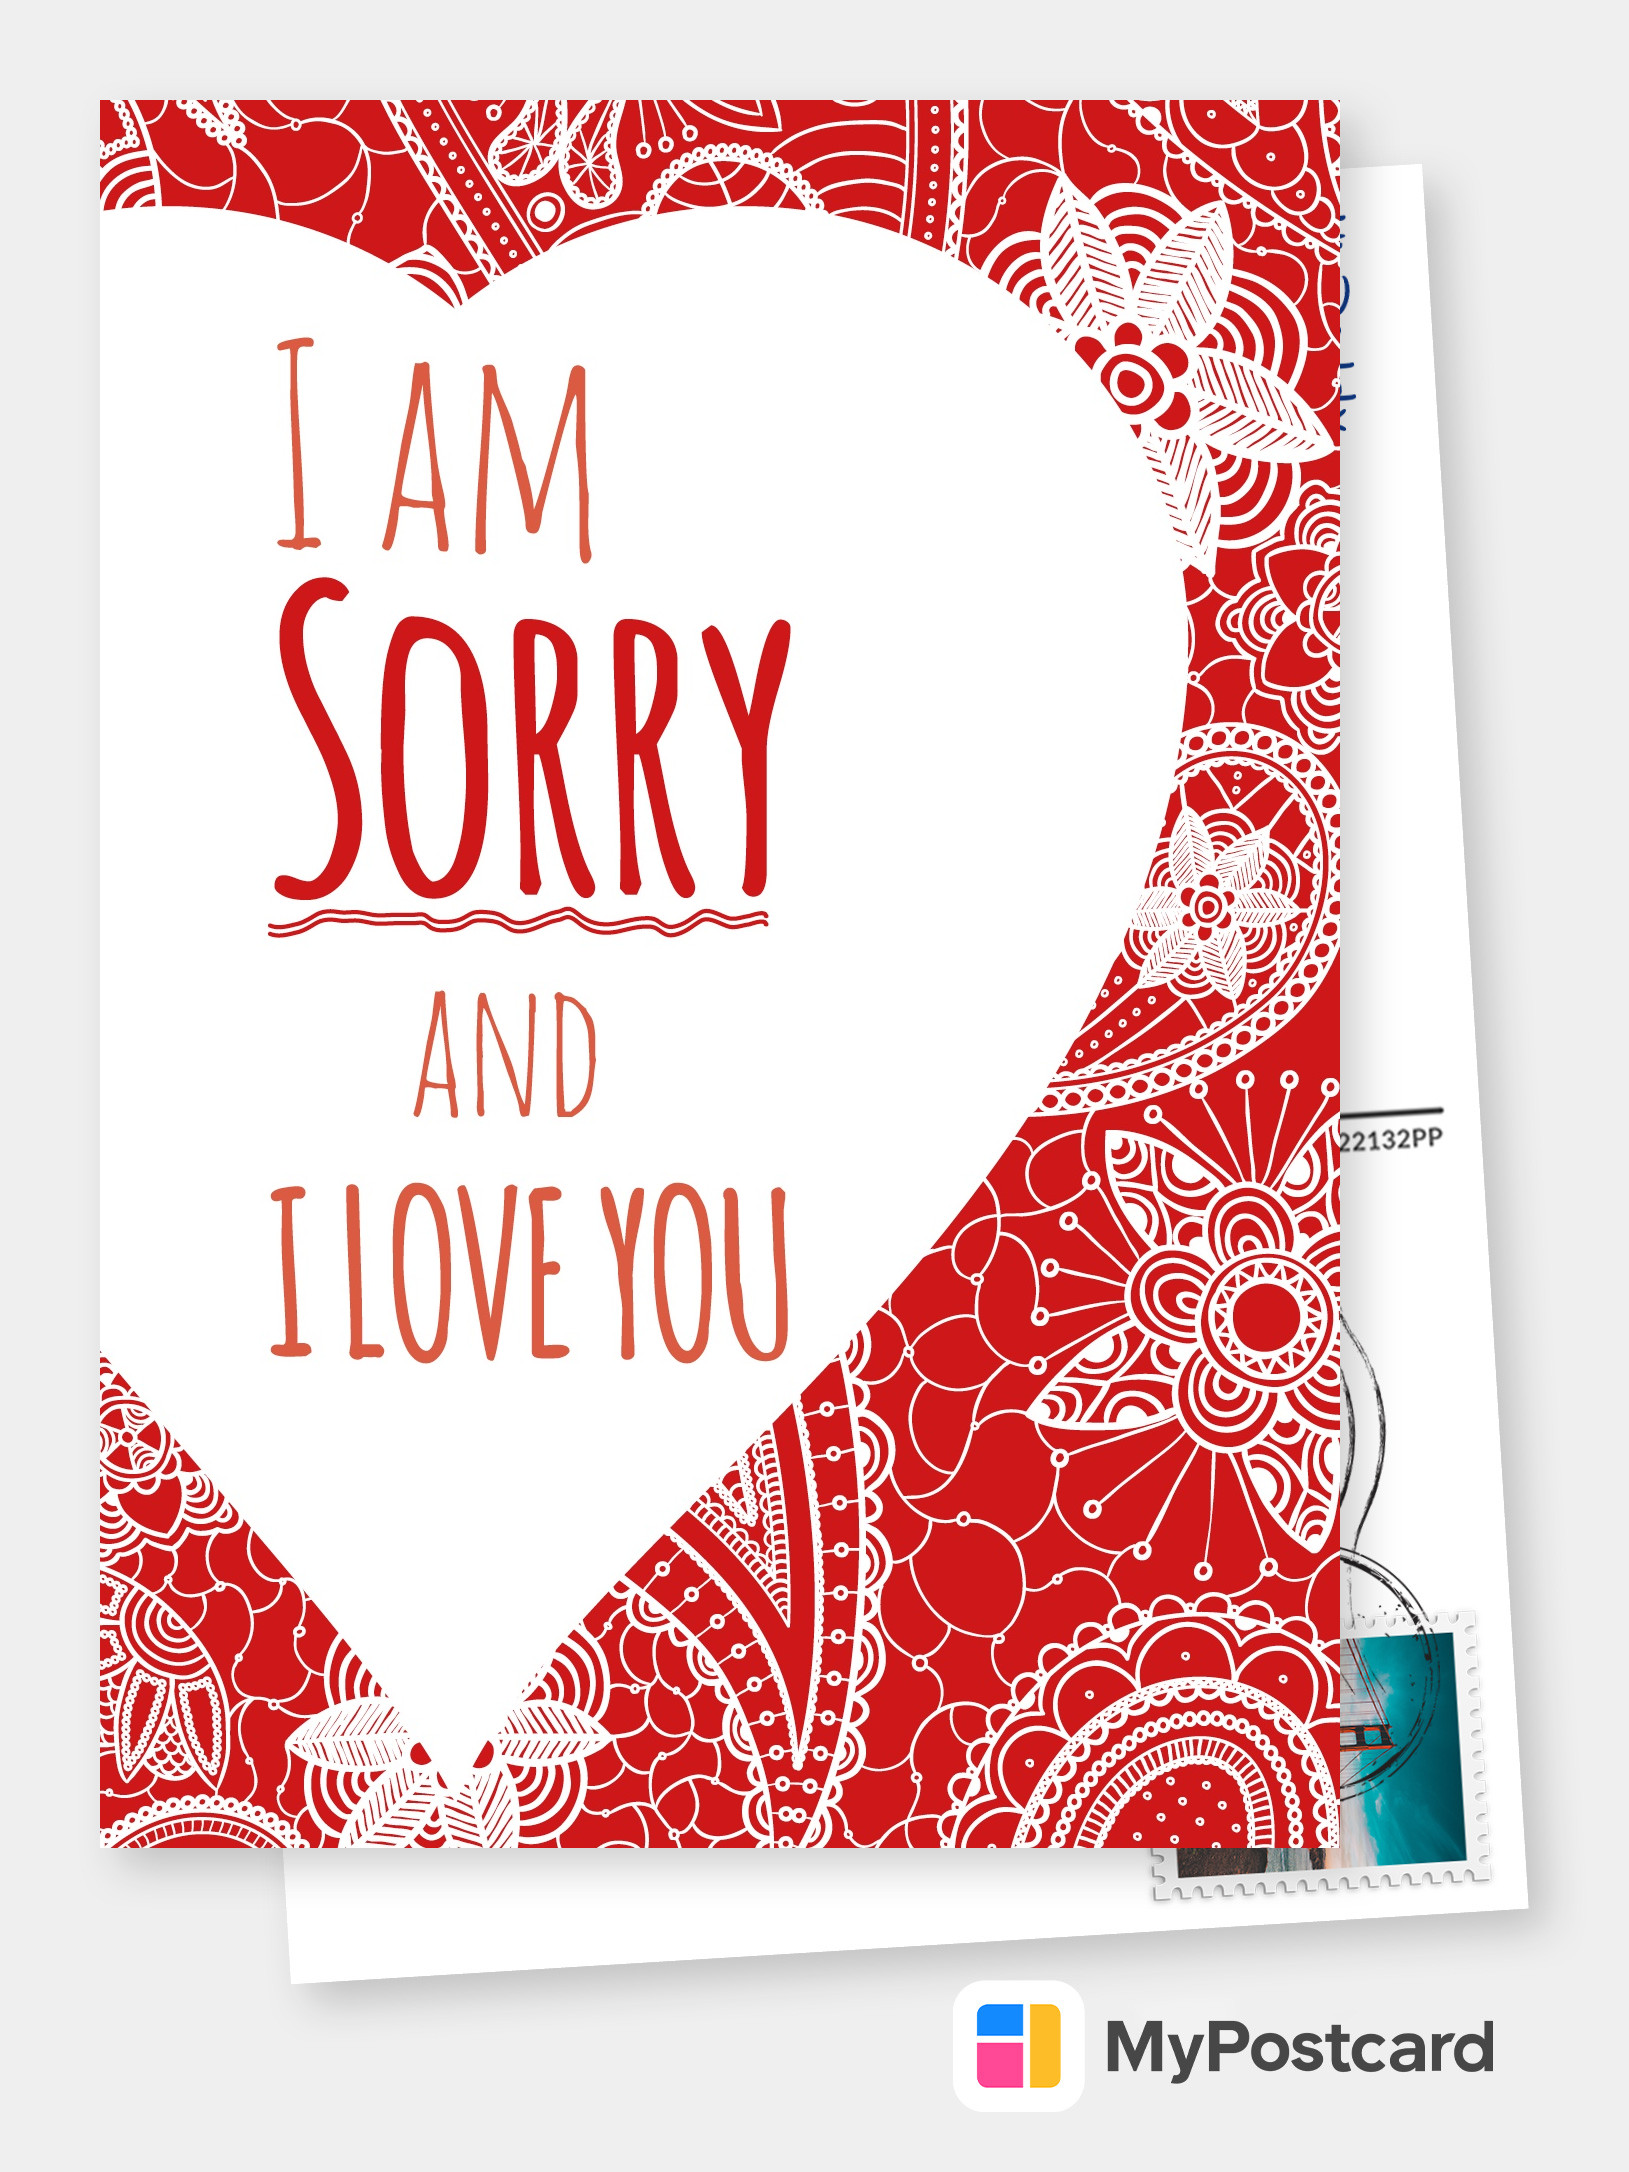 Customized Sorry Cards Online Printed Mailed For You Internationally Printable Sorry Cards Send Online Internationally Free Shipping International